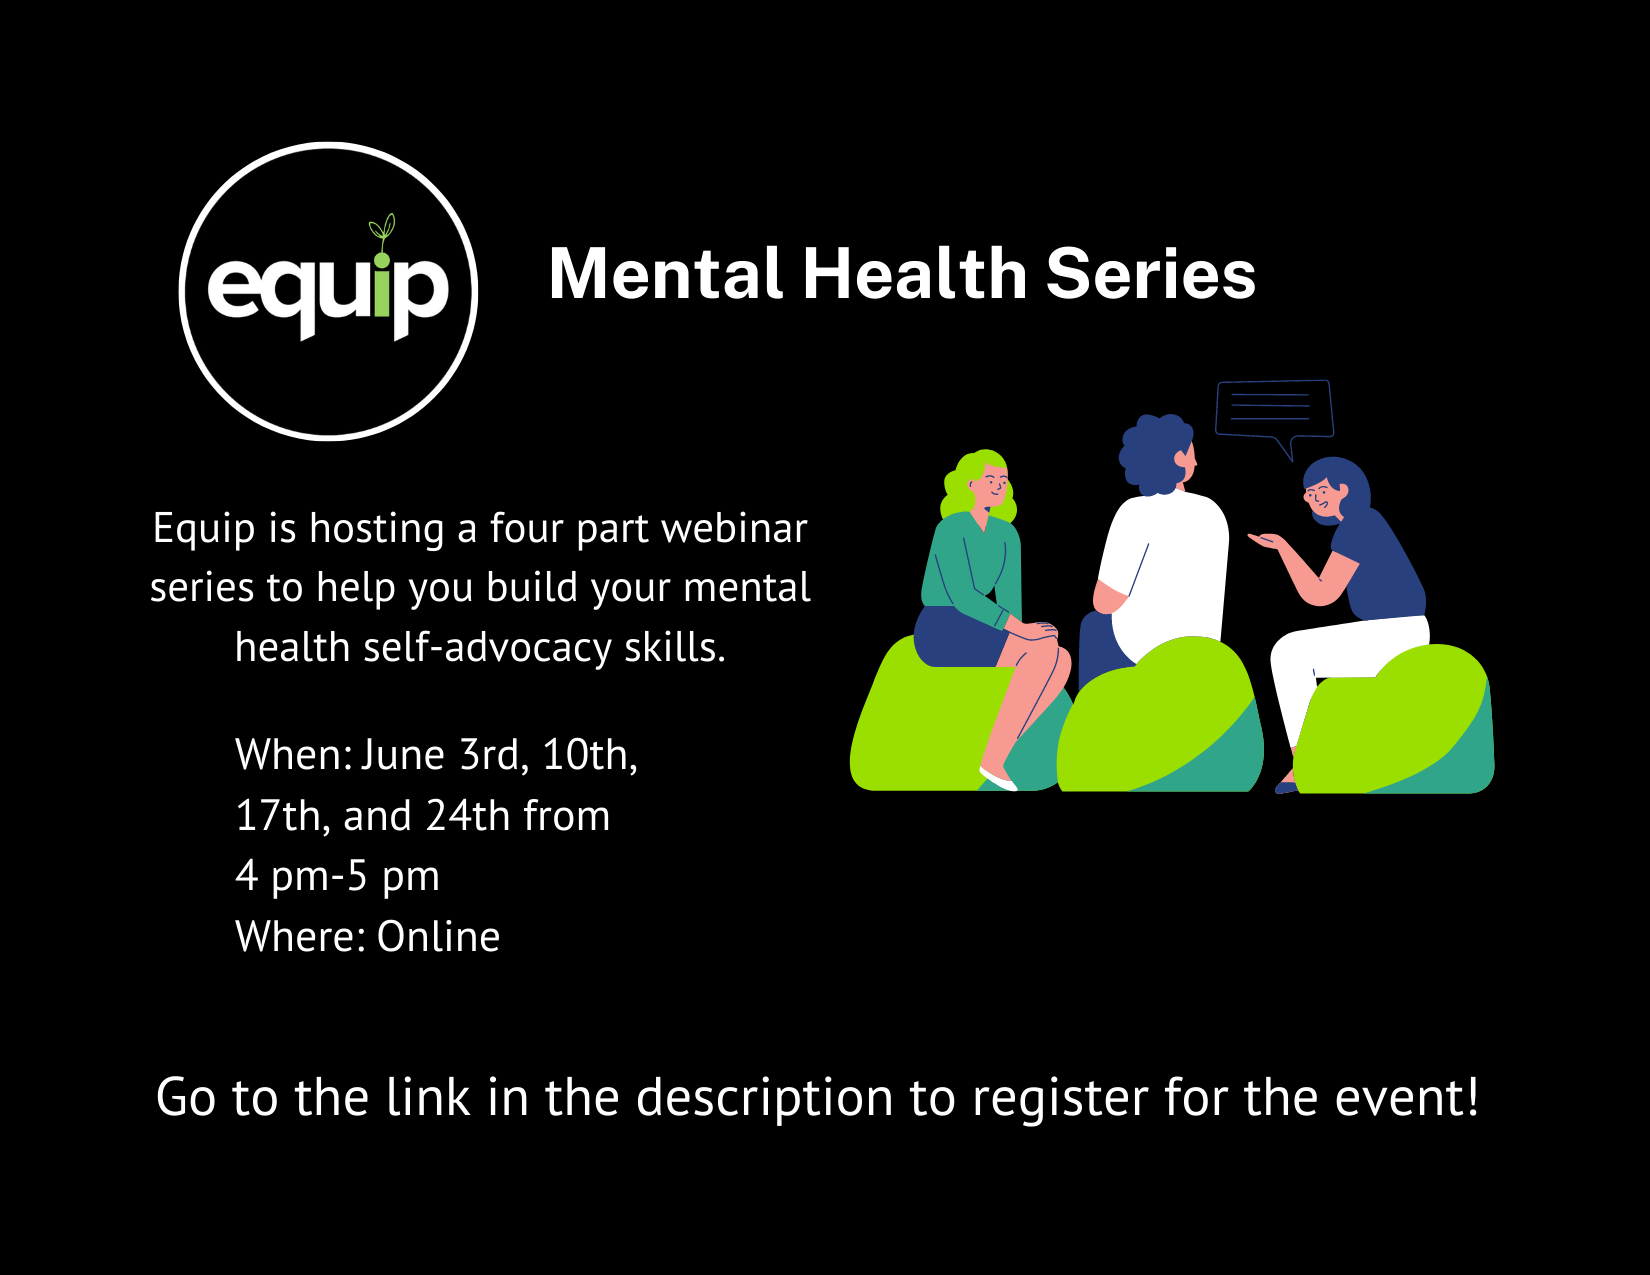 Black square graphic, in the top left corner is the black Equip logo (black circle with the word, 'Equip' in the center. The letter I in Equip is green and has a small plant growing out of it). Around the logo is a white circle. To the right of the logo is white text that says, 'Mental Health Series'. Underneath the logo is white text that says, 'When: June 3rd, 10th, 17th, and 24th from 4pm-5 pm, Where: Online.' Beside the text is a drawing of three people sitting in a circle and talking. The person on the right has a blue chat bubble above their head. Below the drawing is white text that says, 'Go to the link in the description to register for the event!